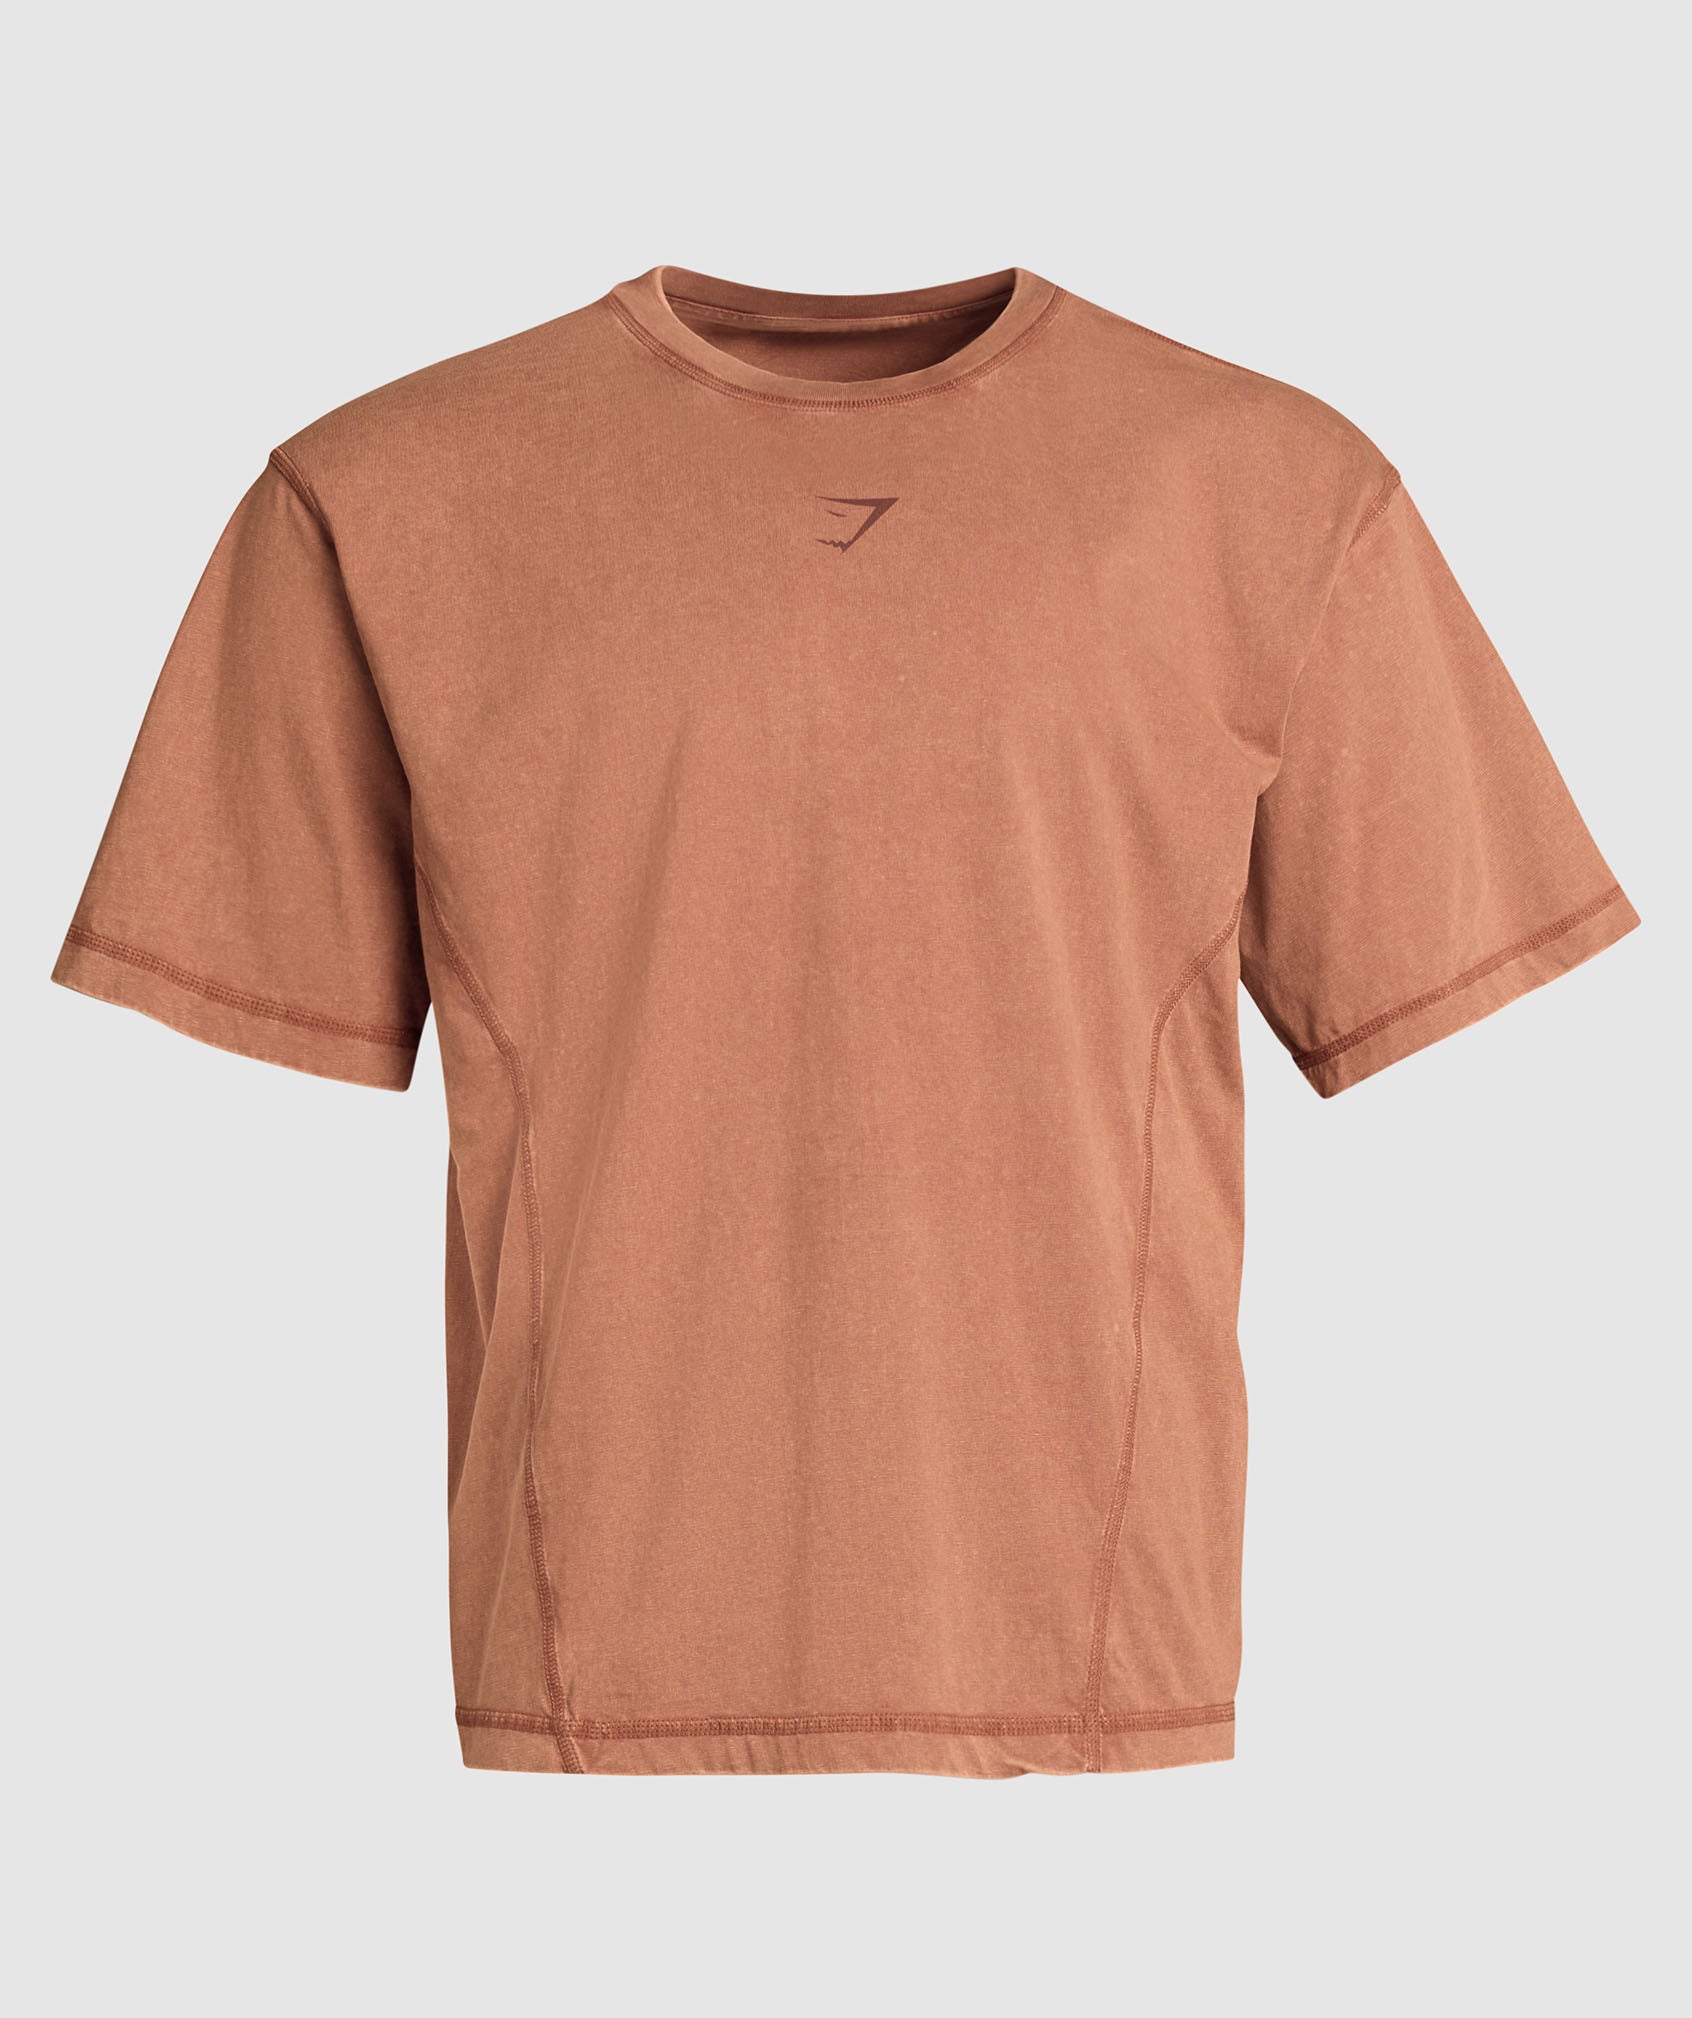 Heritage Washed T-Shirt in Canyon Brown - view 8